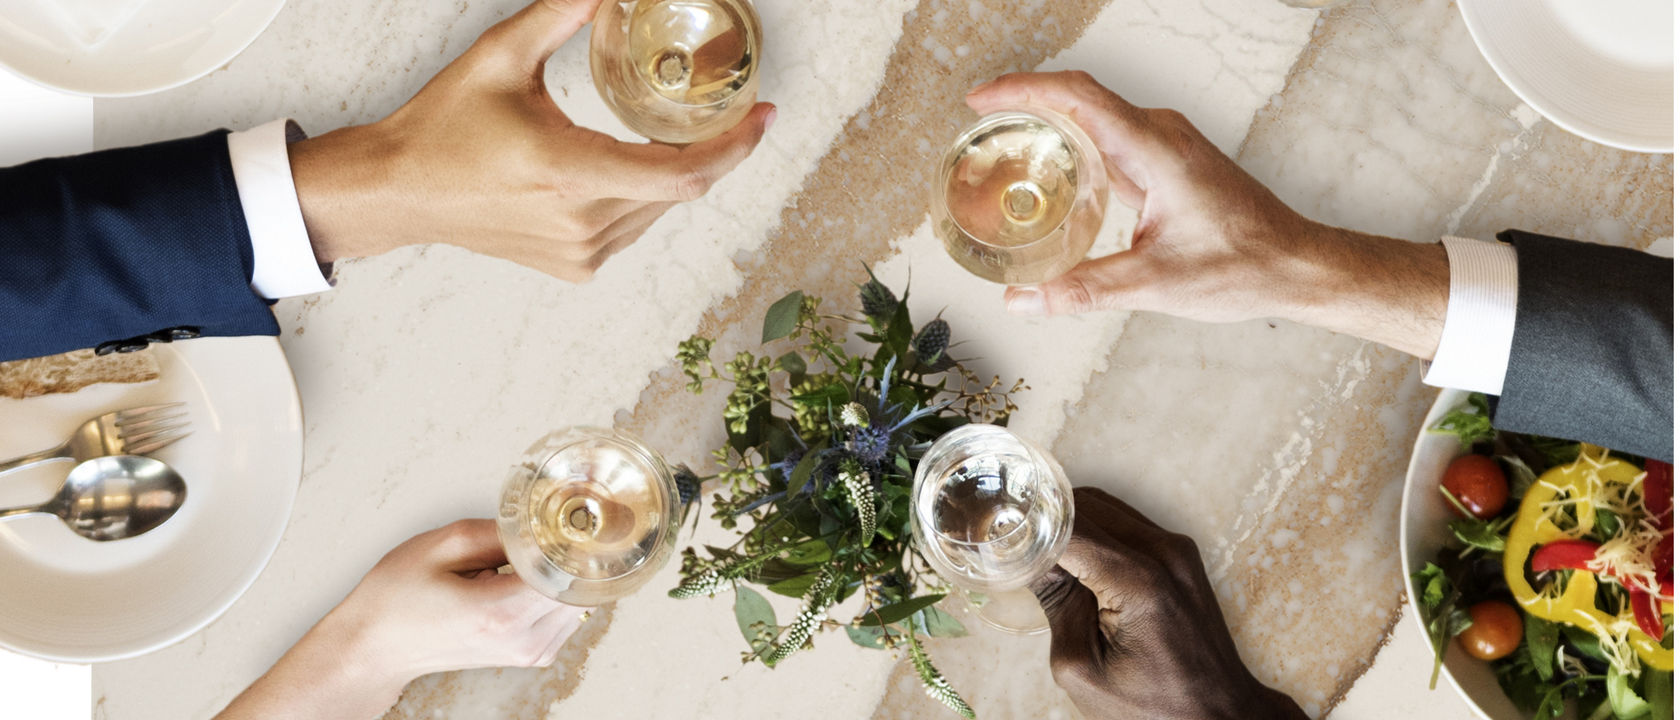 Top-down view of five people holding various drinks over a Cambria Brittanicca Gold Warm quartz countertop.